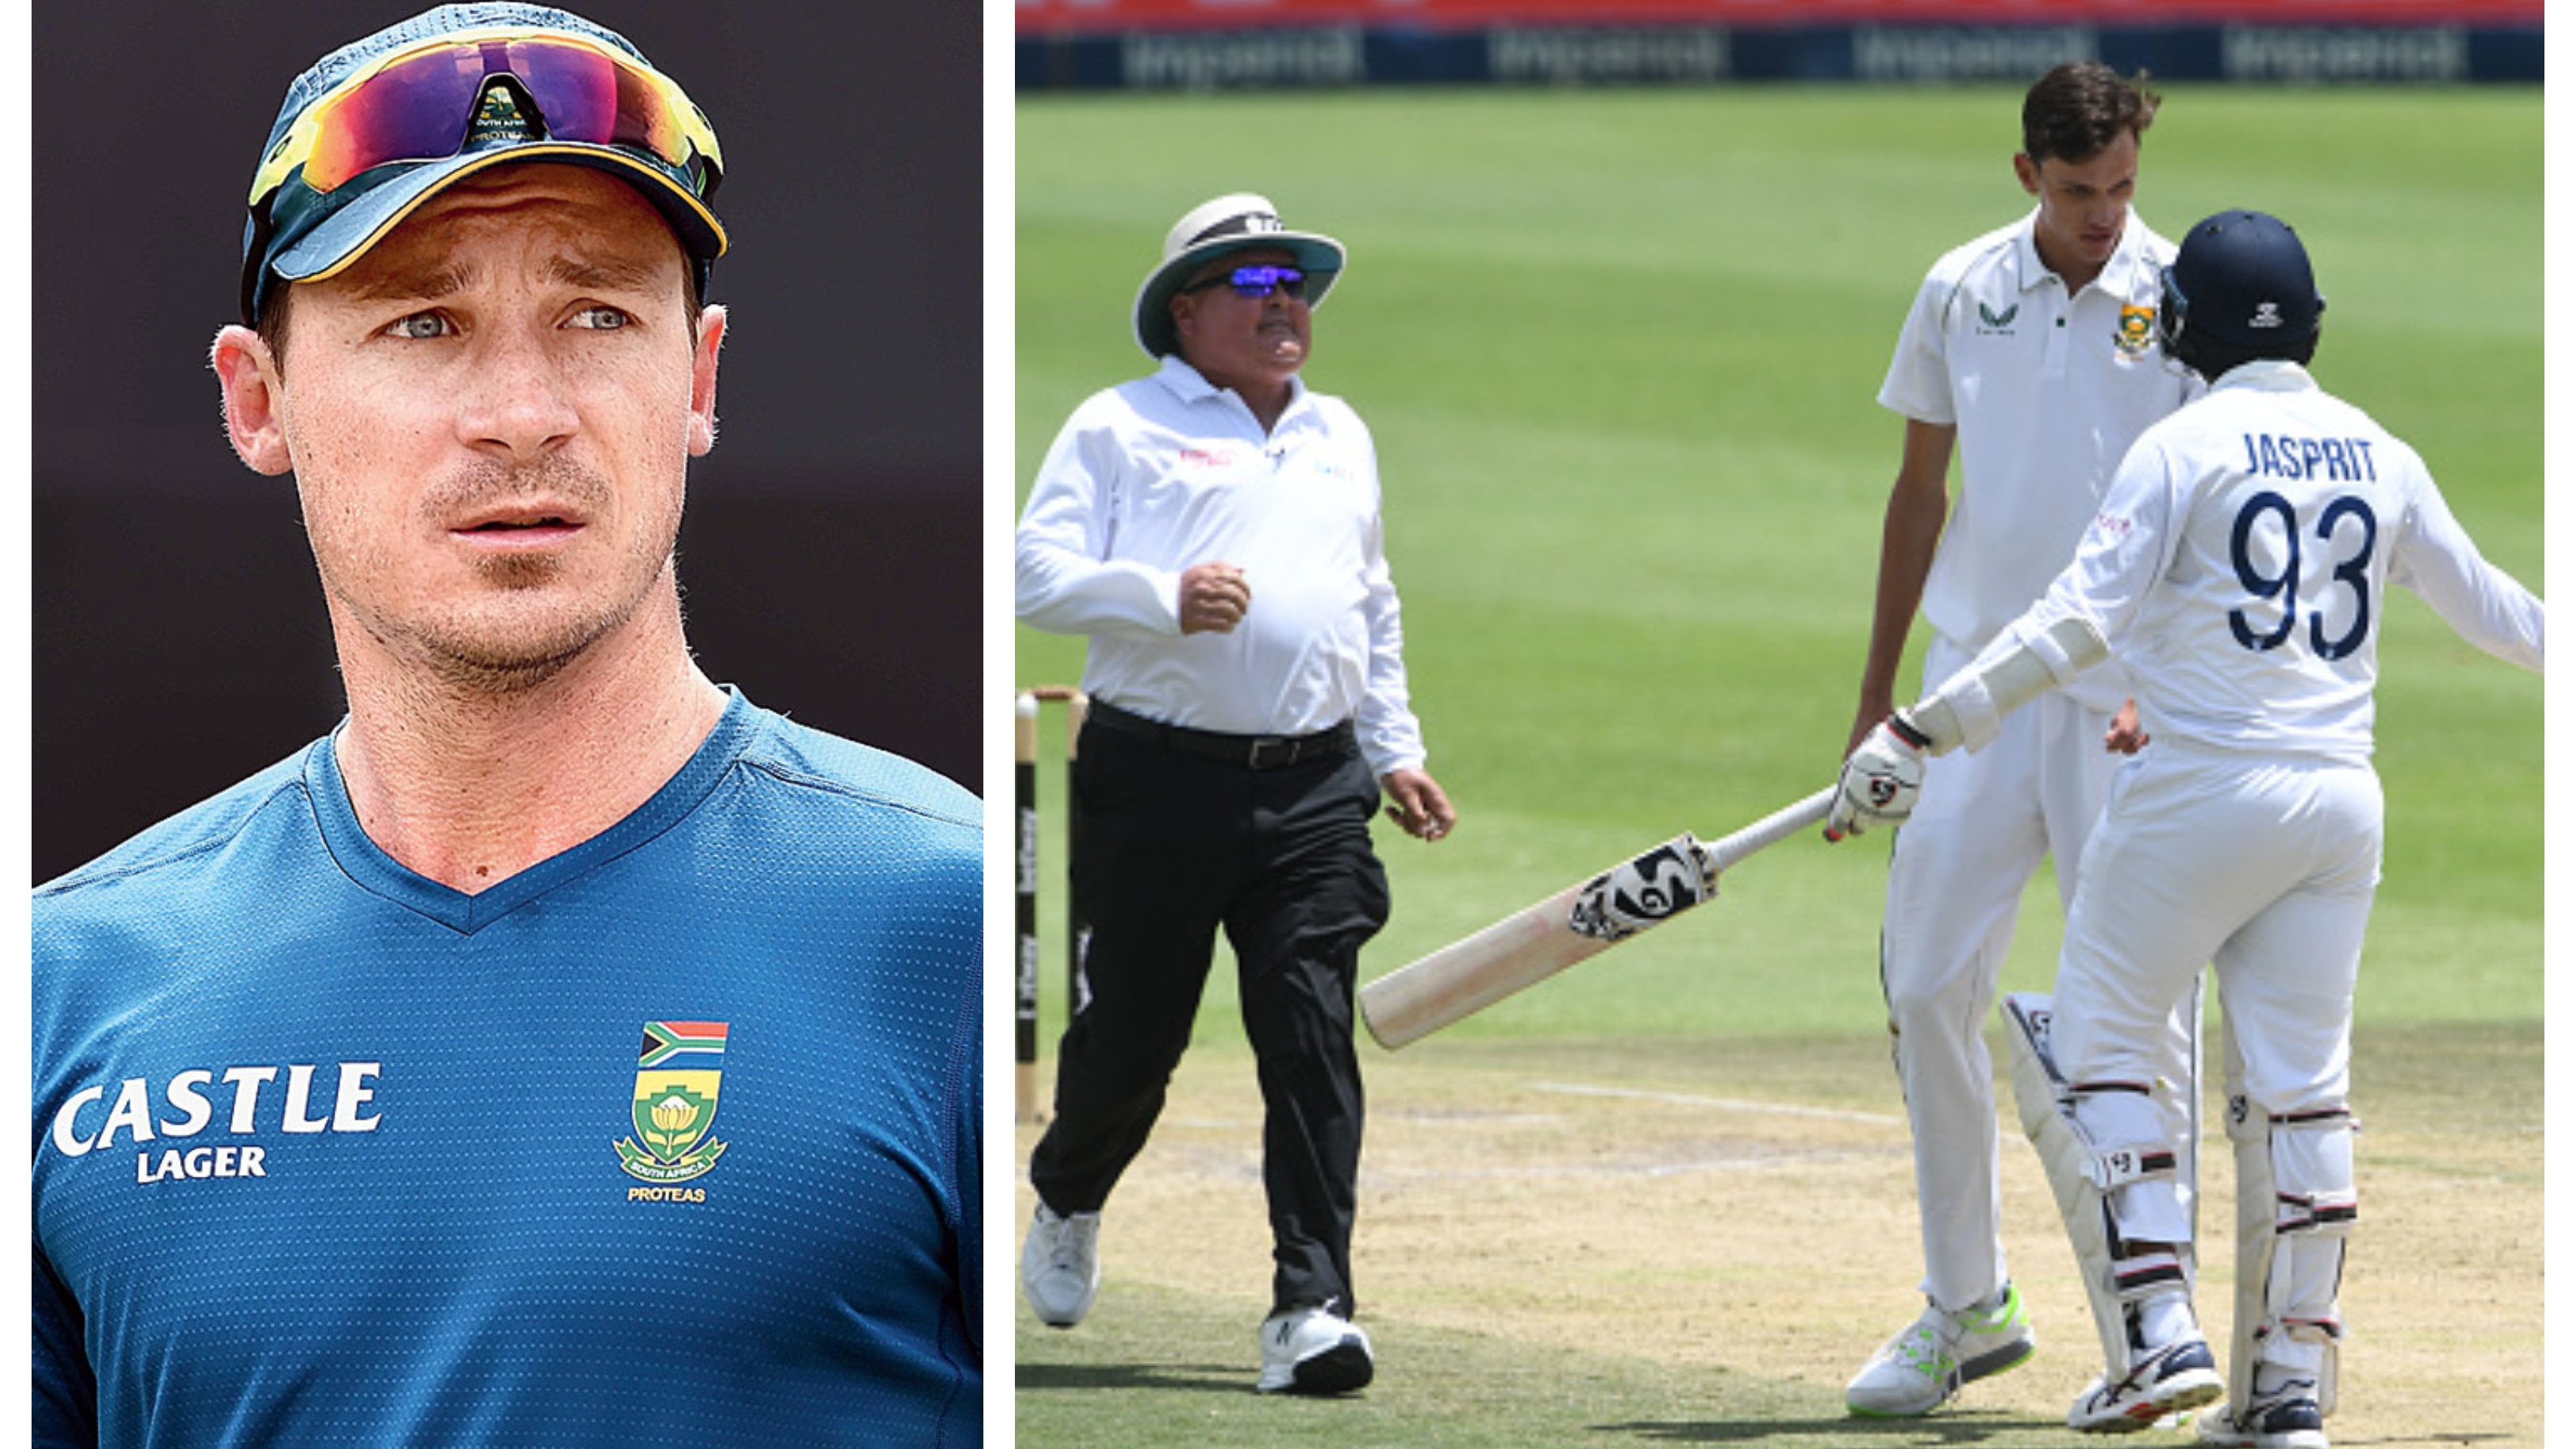 SA v IND 2021-22: ‘Learn to take it kid’, Steyn advises Bumrah after latter’s heated confrontation with Marco Jansen